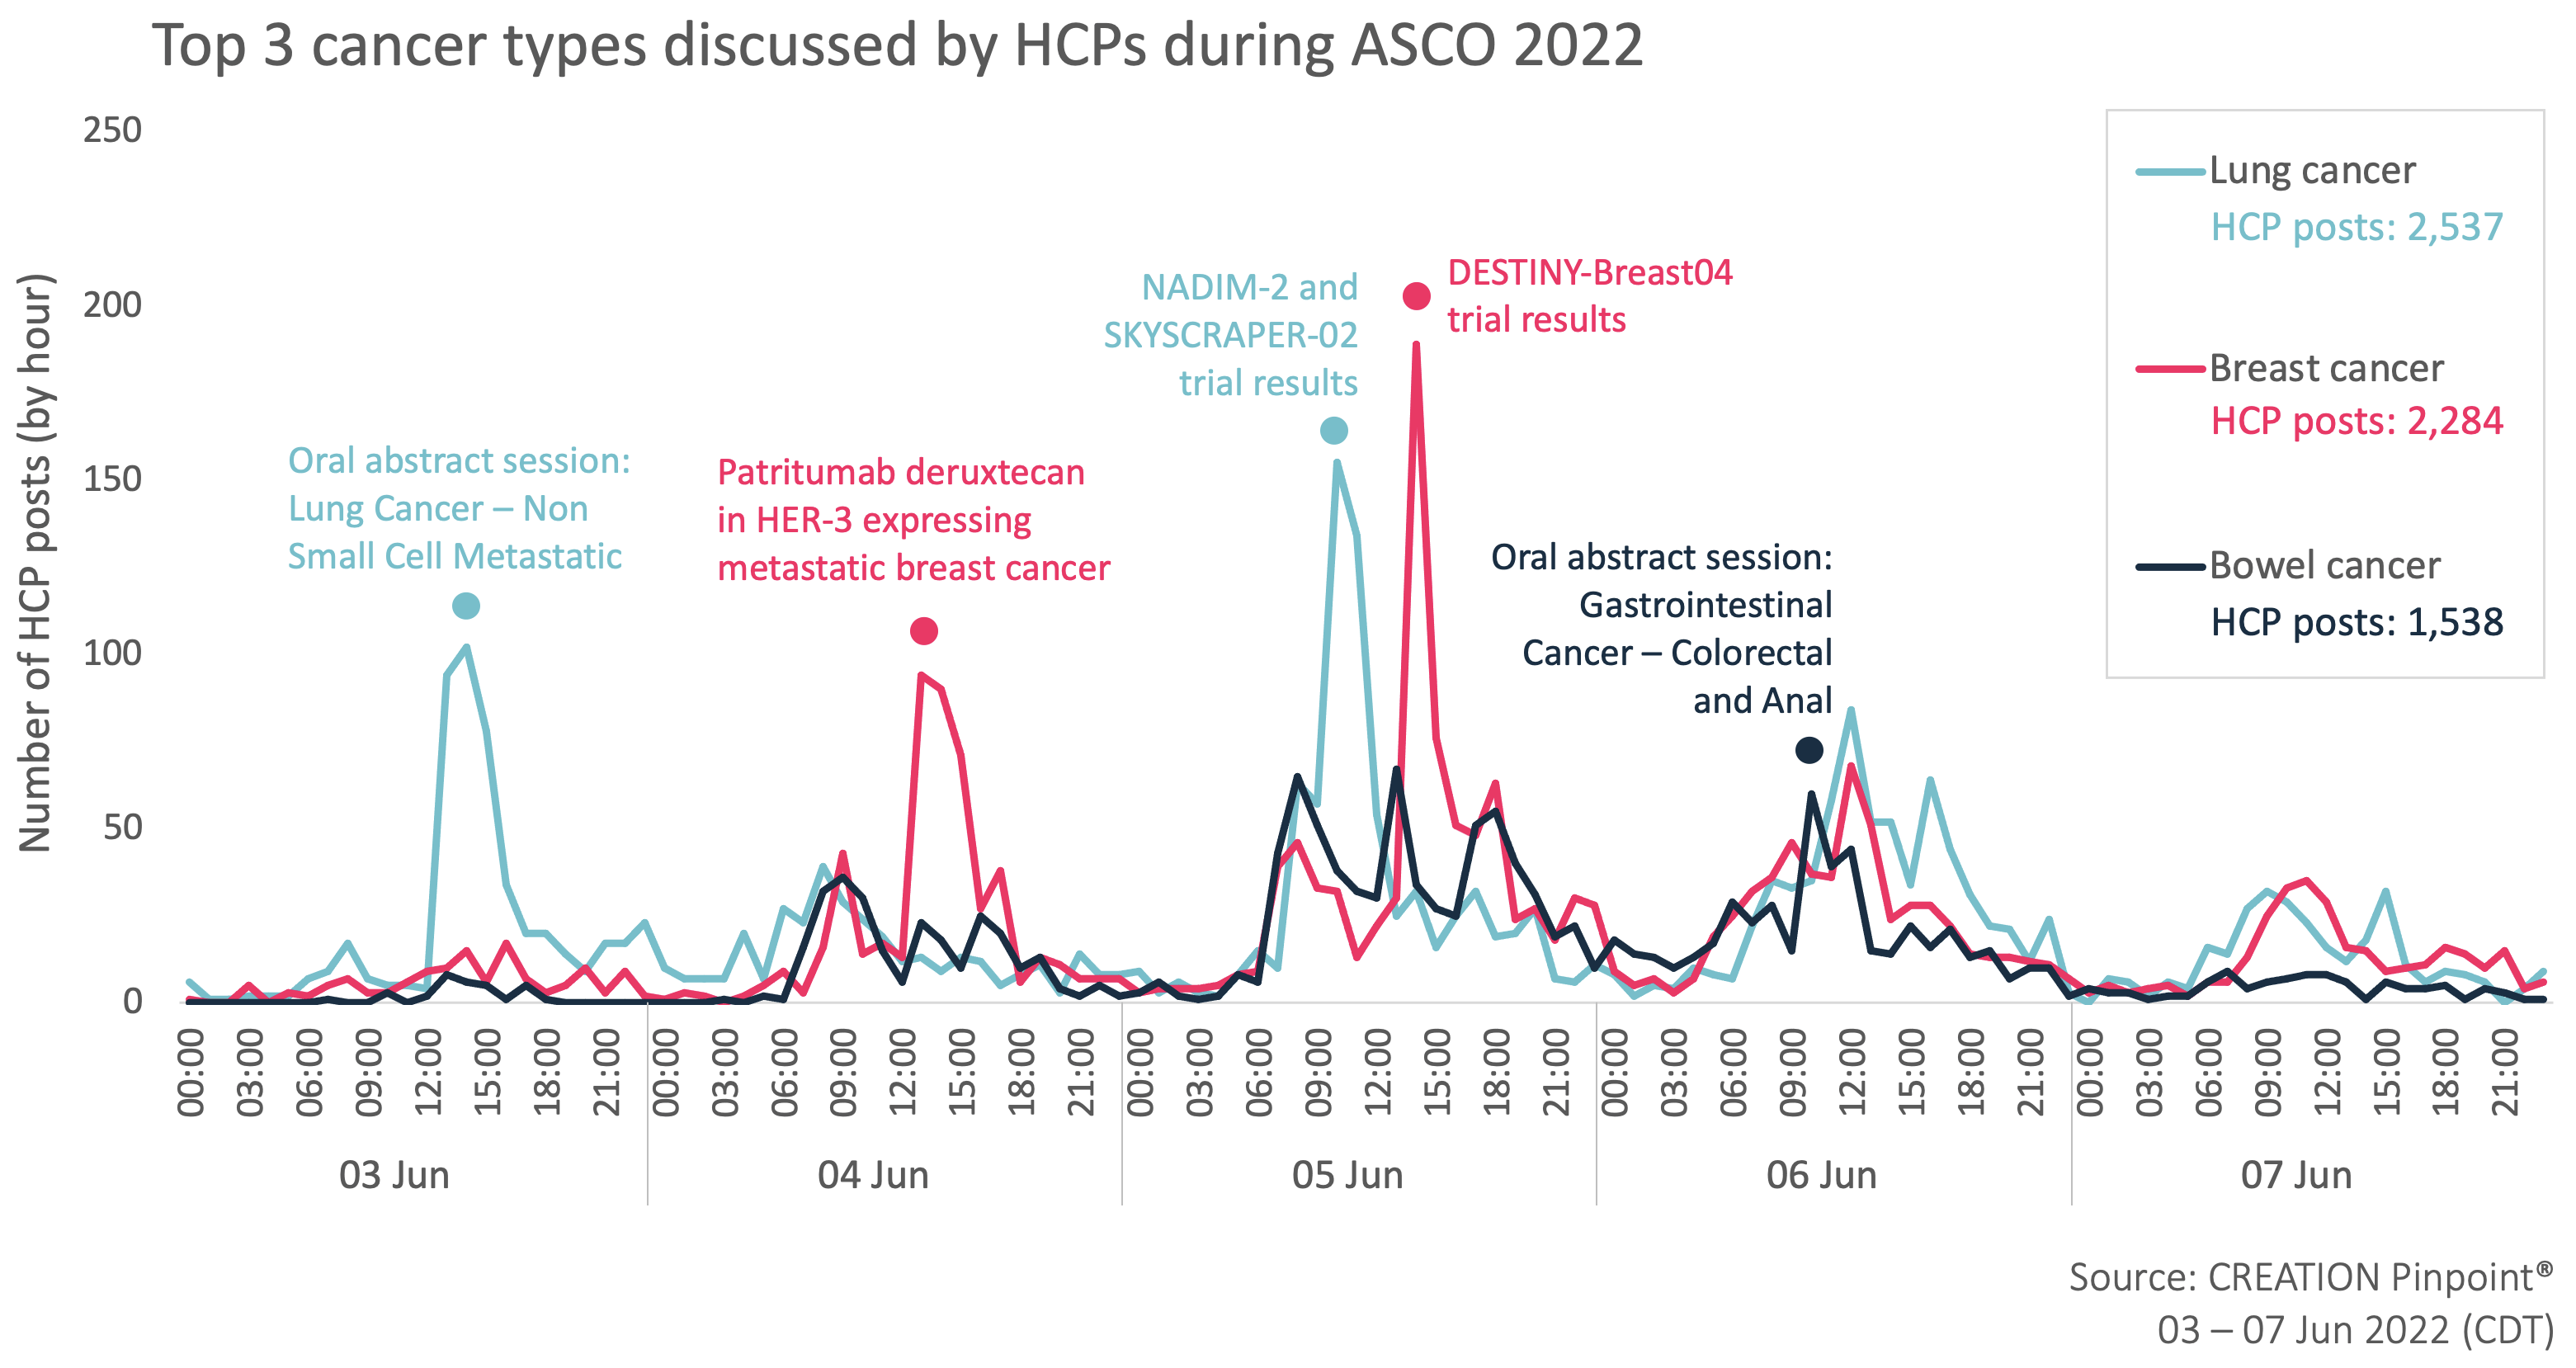 A graph showing the TOP3 cancer types discussed by HCPs during ASCO 2022